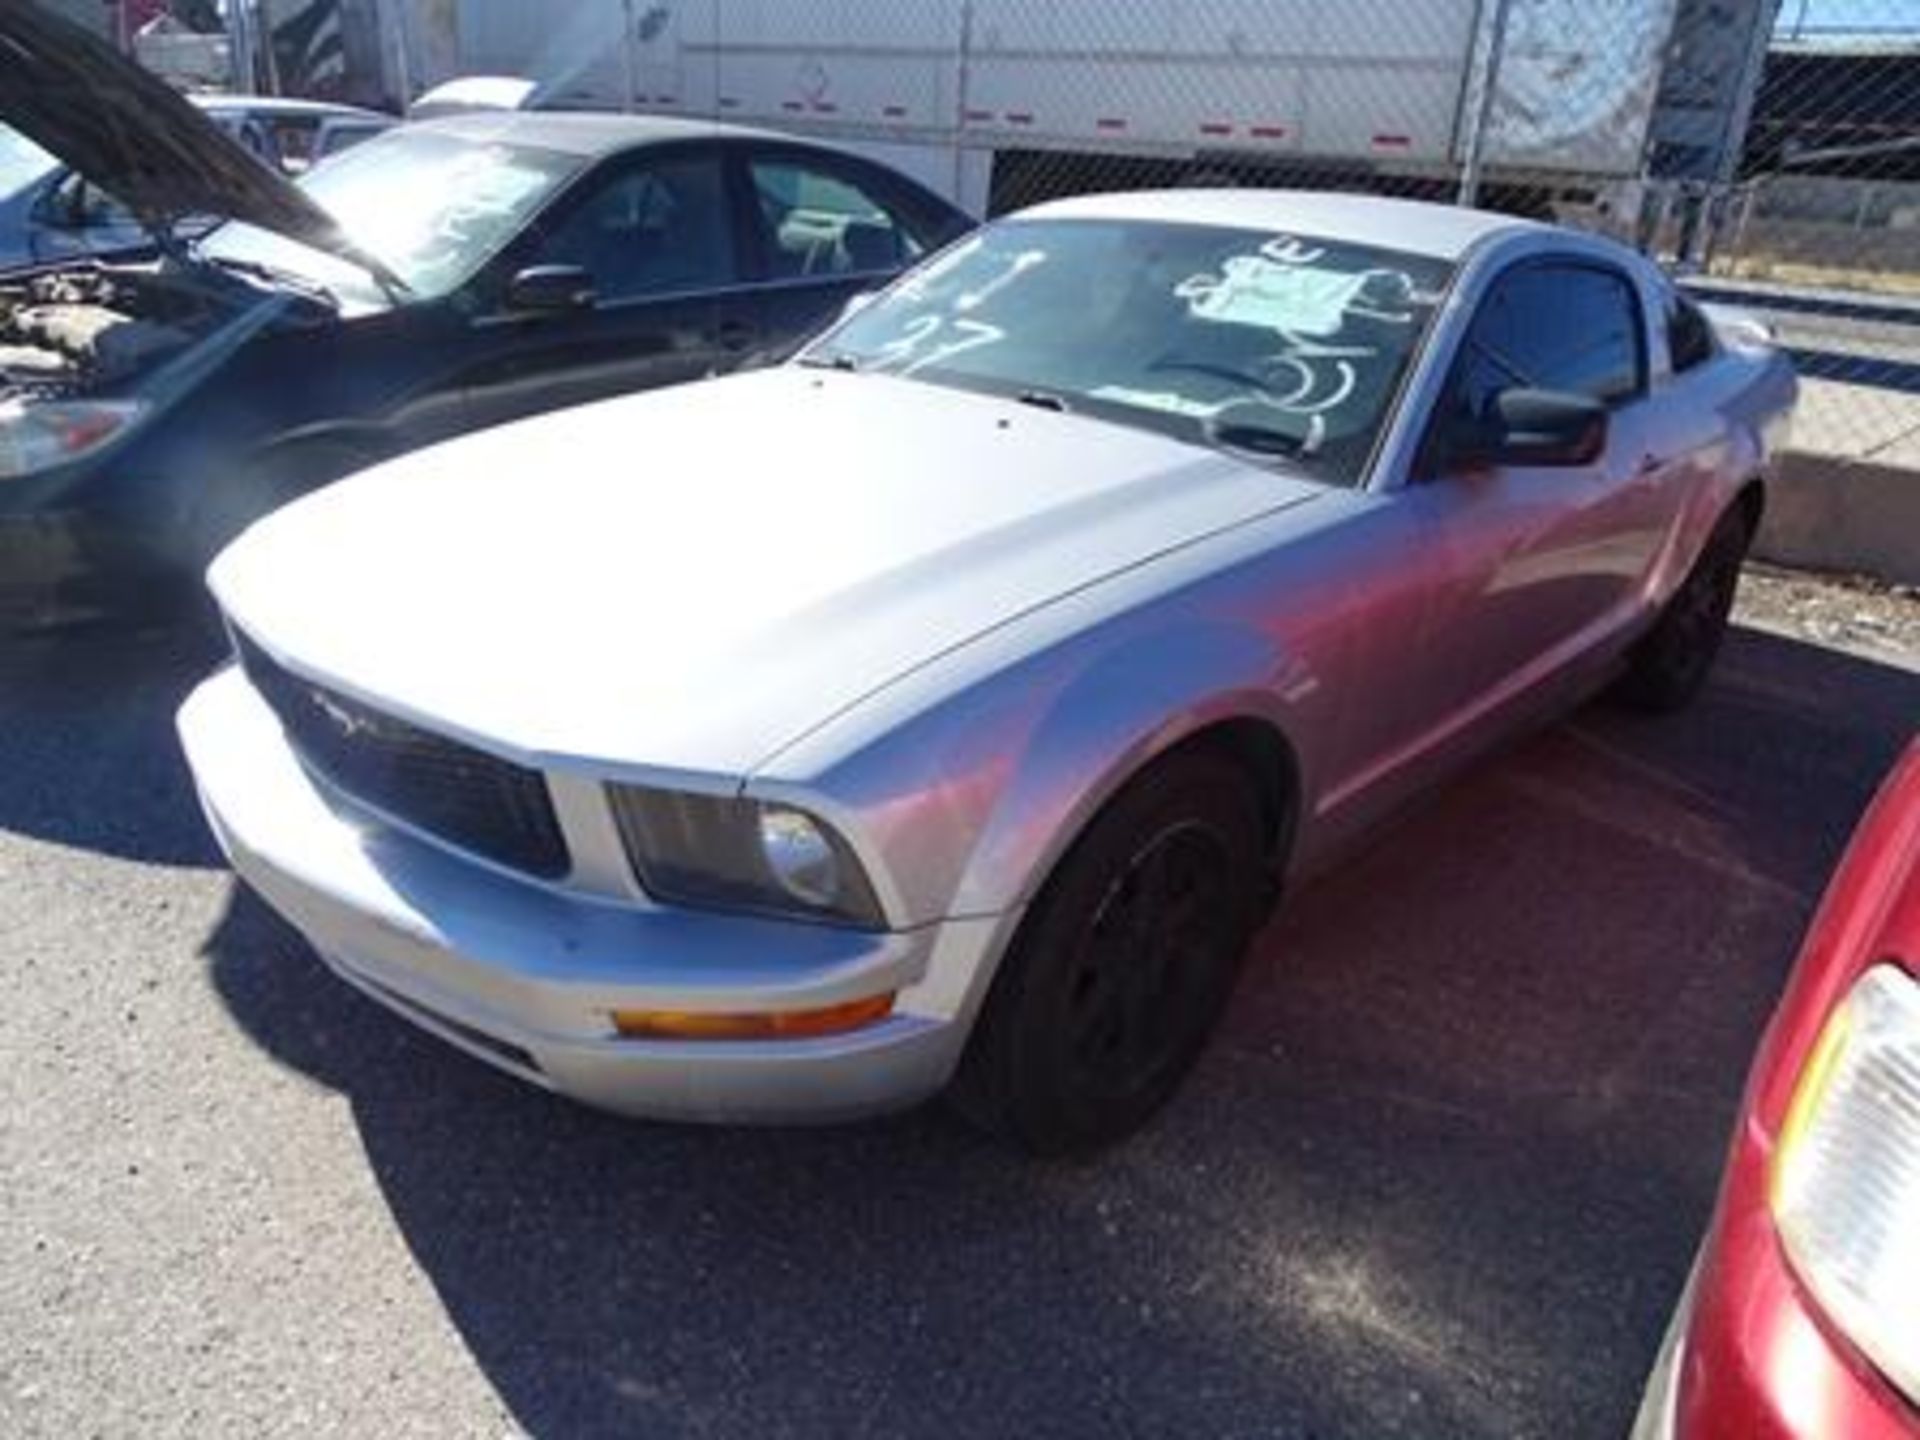 Vehículo Marca Ford Mustang, Tipo Sedan, Modelo 2007, Located In: Chihuahua, Deposit Of: $5000